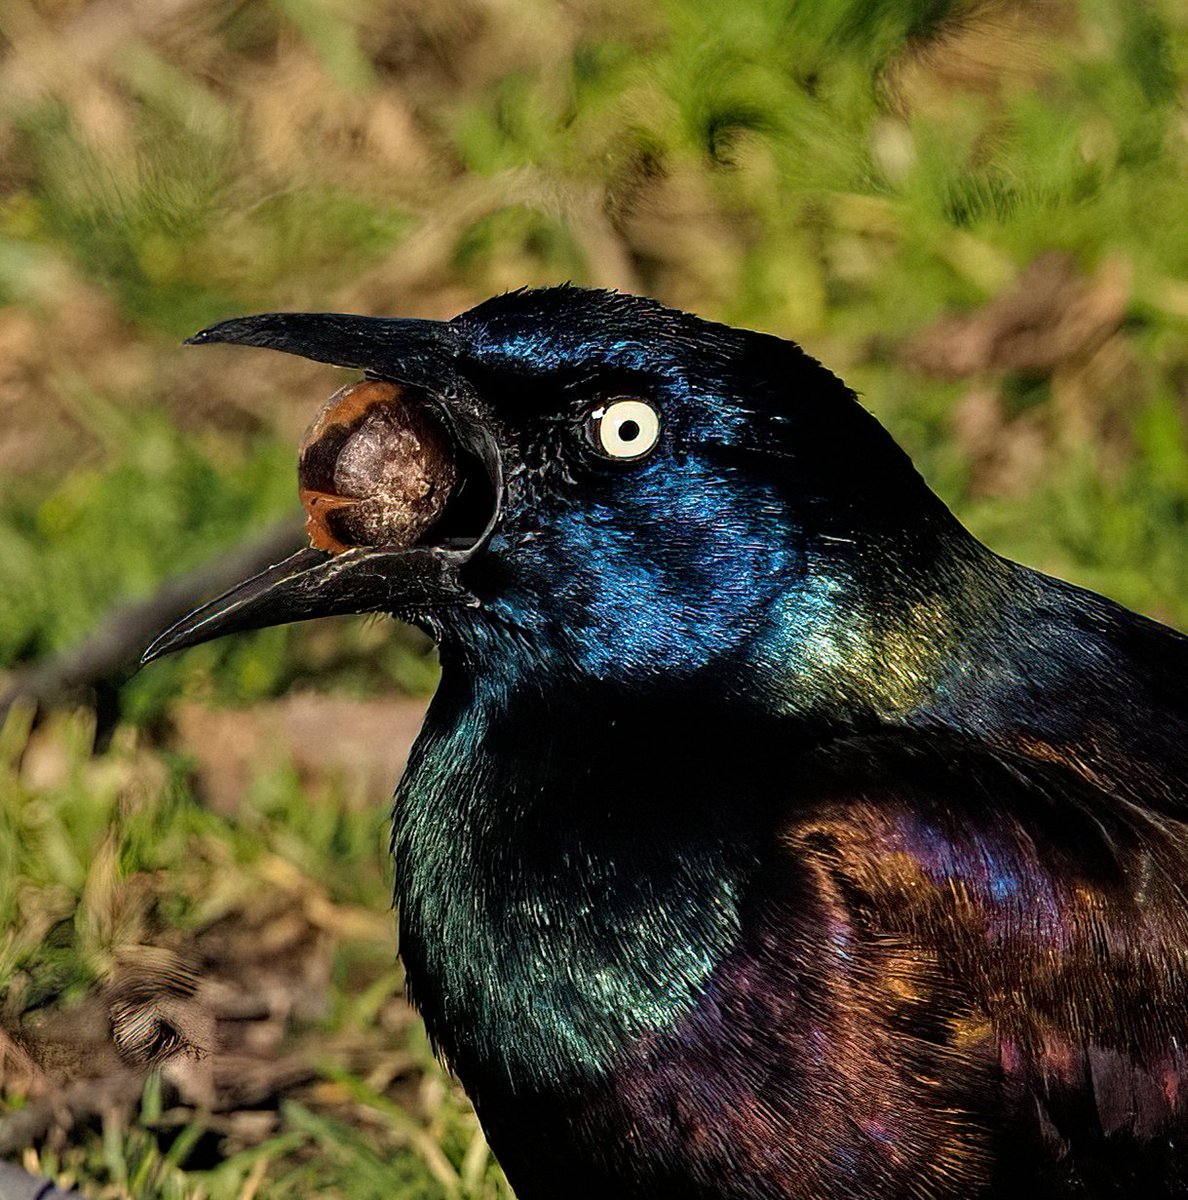 Common Grackles look pretty common--until you see them in the right light, and then 🌈🌈🌈! If you look closely, you can see its tongue wrapped around the acorn, as it tried to swallow it! #Grackle #CentralPark #birdcpp